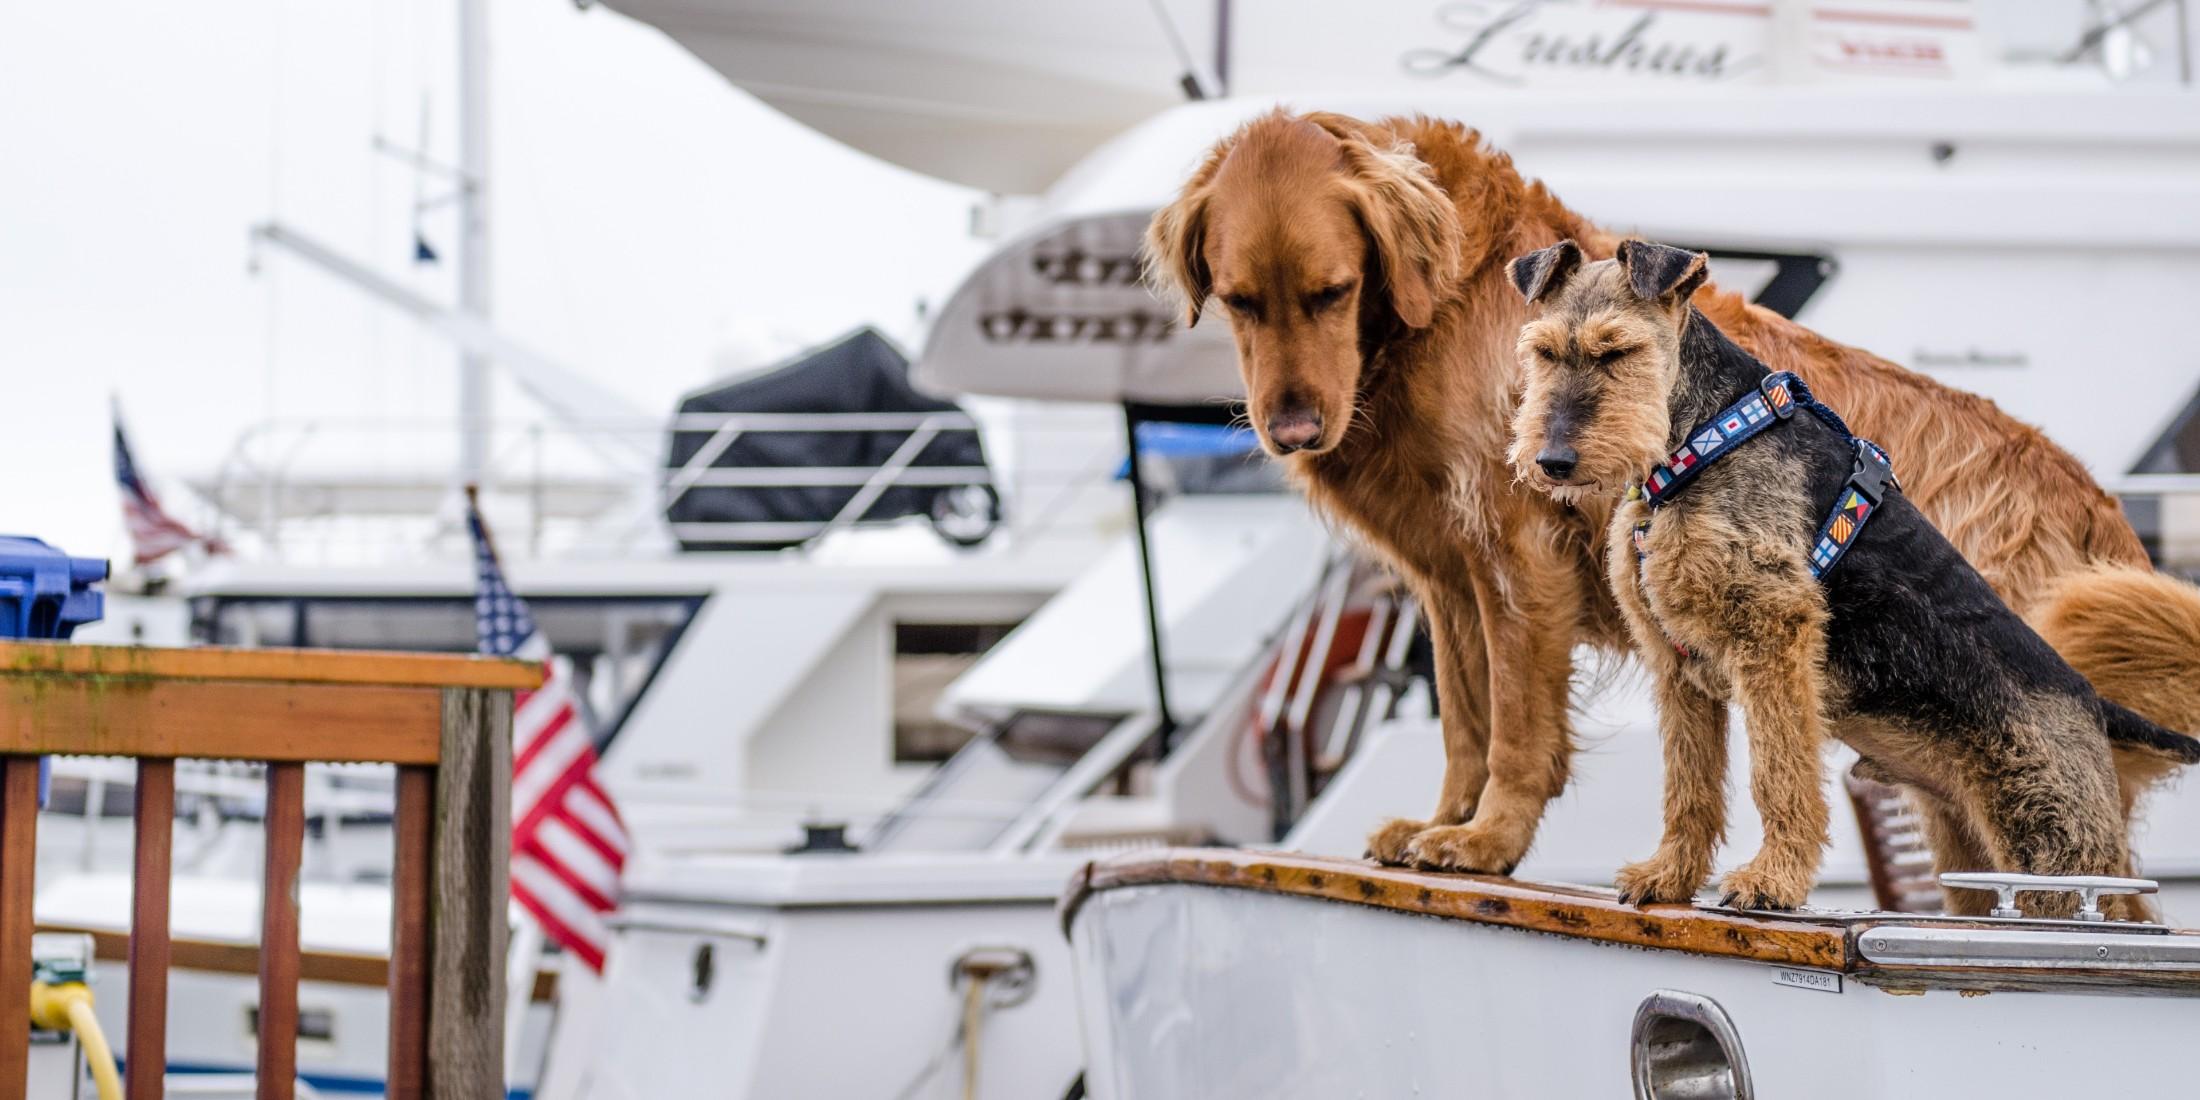 Who’s a Good Buoy? 7 Sailing Trips to Take with Fido